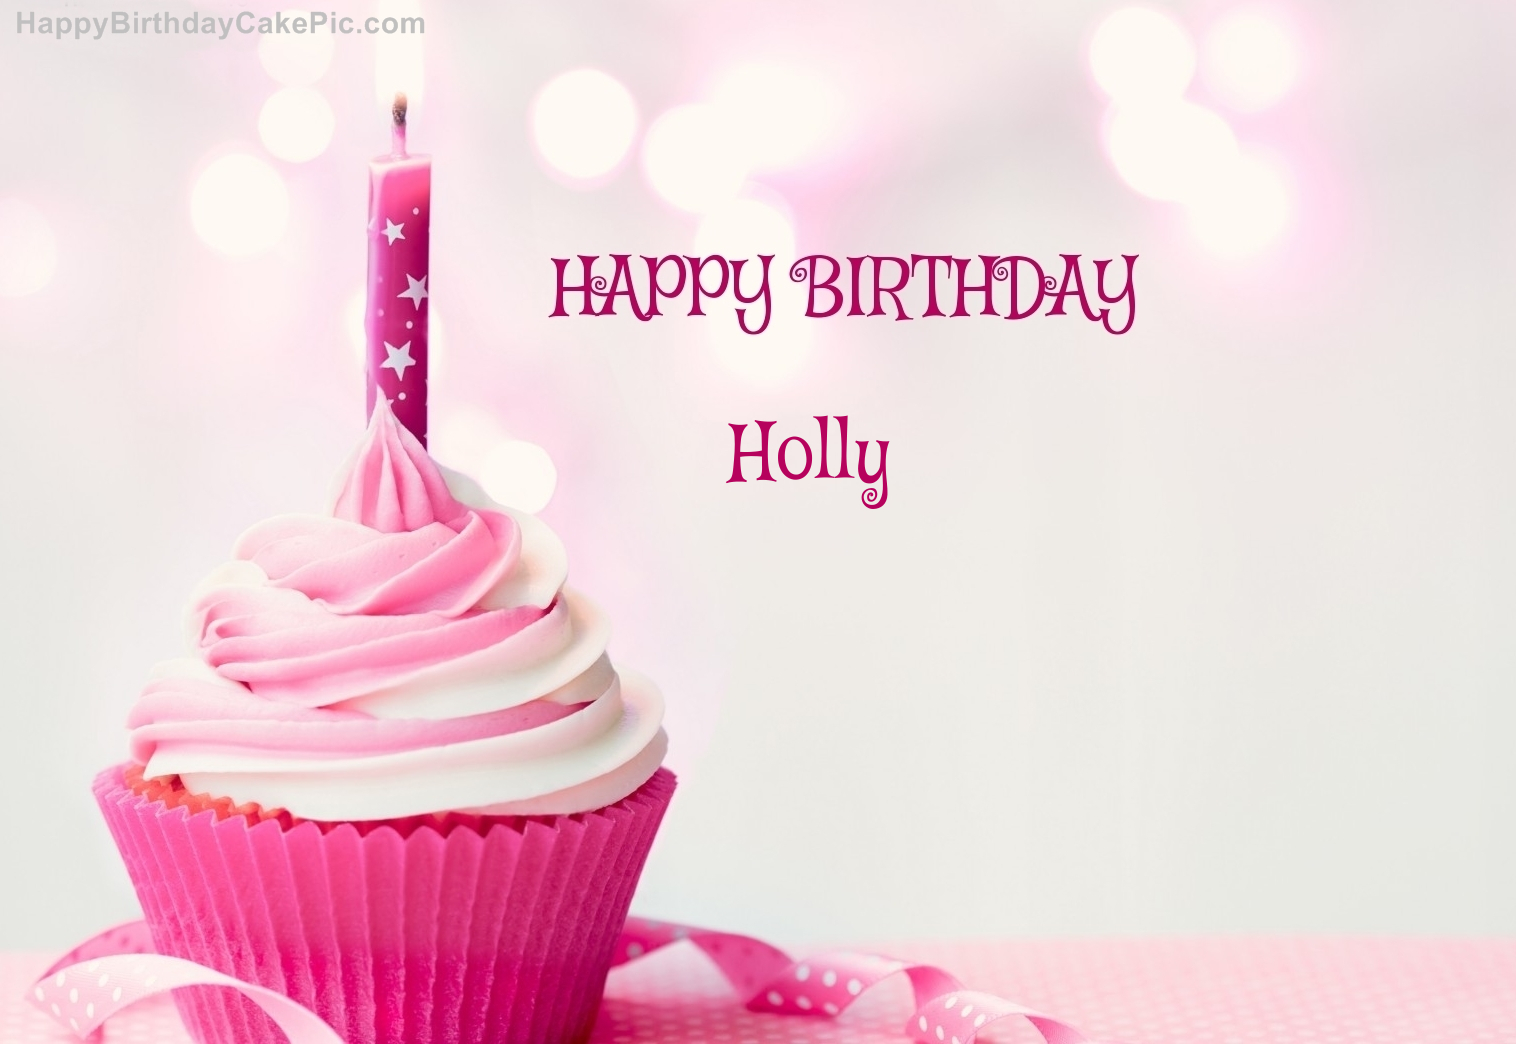 happy-birthday-cupcake-candle-pink-picture-for-Holly.